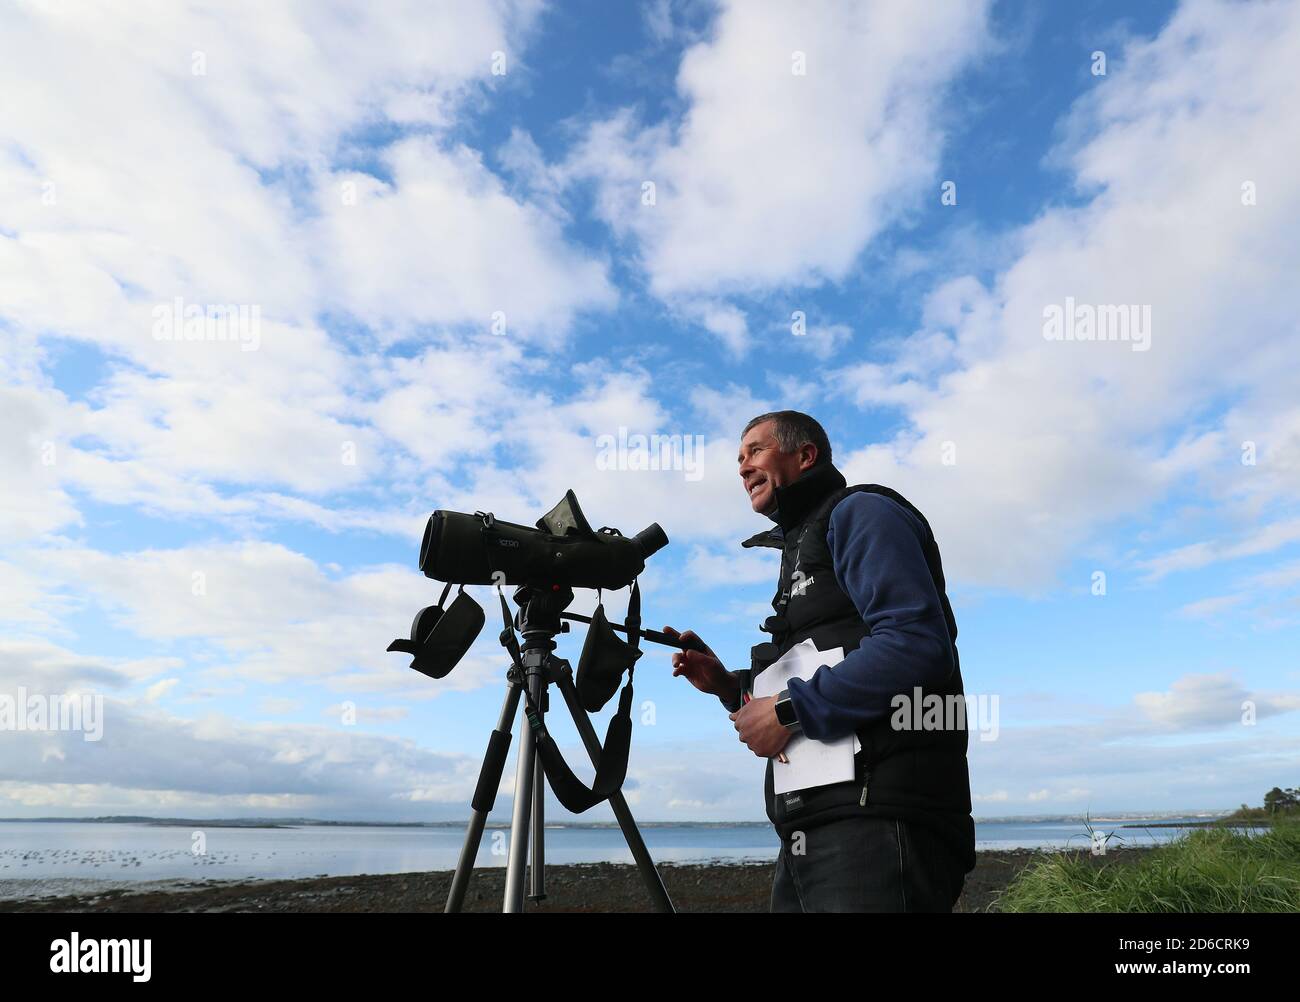 Andrew Upton, National Trust countryside manager for East Down, on the shores of Strangford Lough in Newtownards, Northern Ireland, as the National Trust undertake their annual count of the Canadian Brent Geese population. Between 20,000 to 30,000 geese arrive on the lough each year having journeyed from Canada. Stock Photo